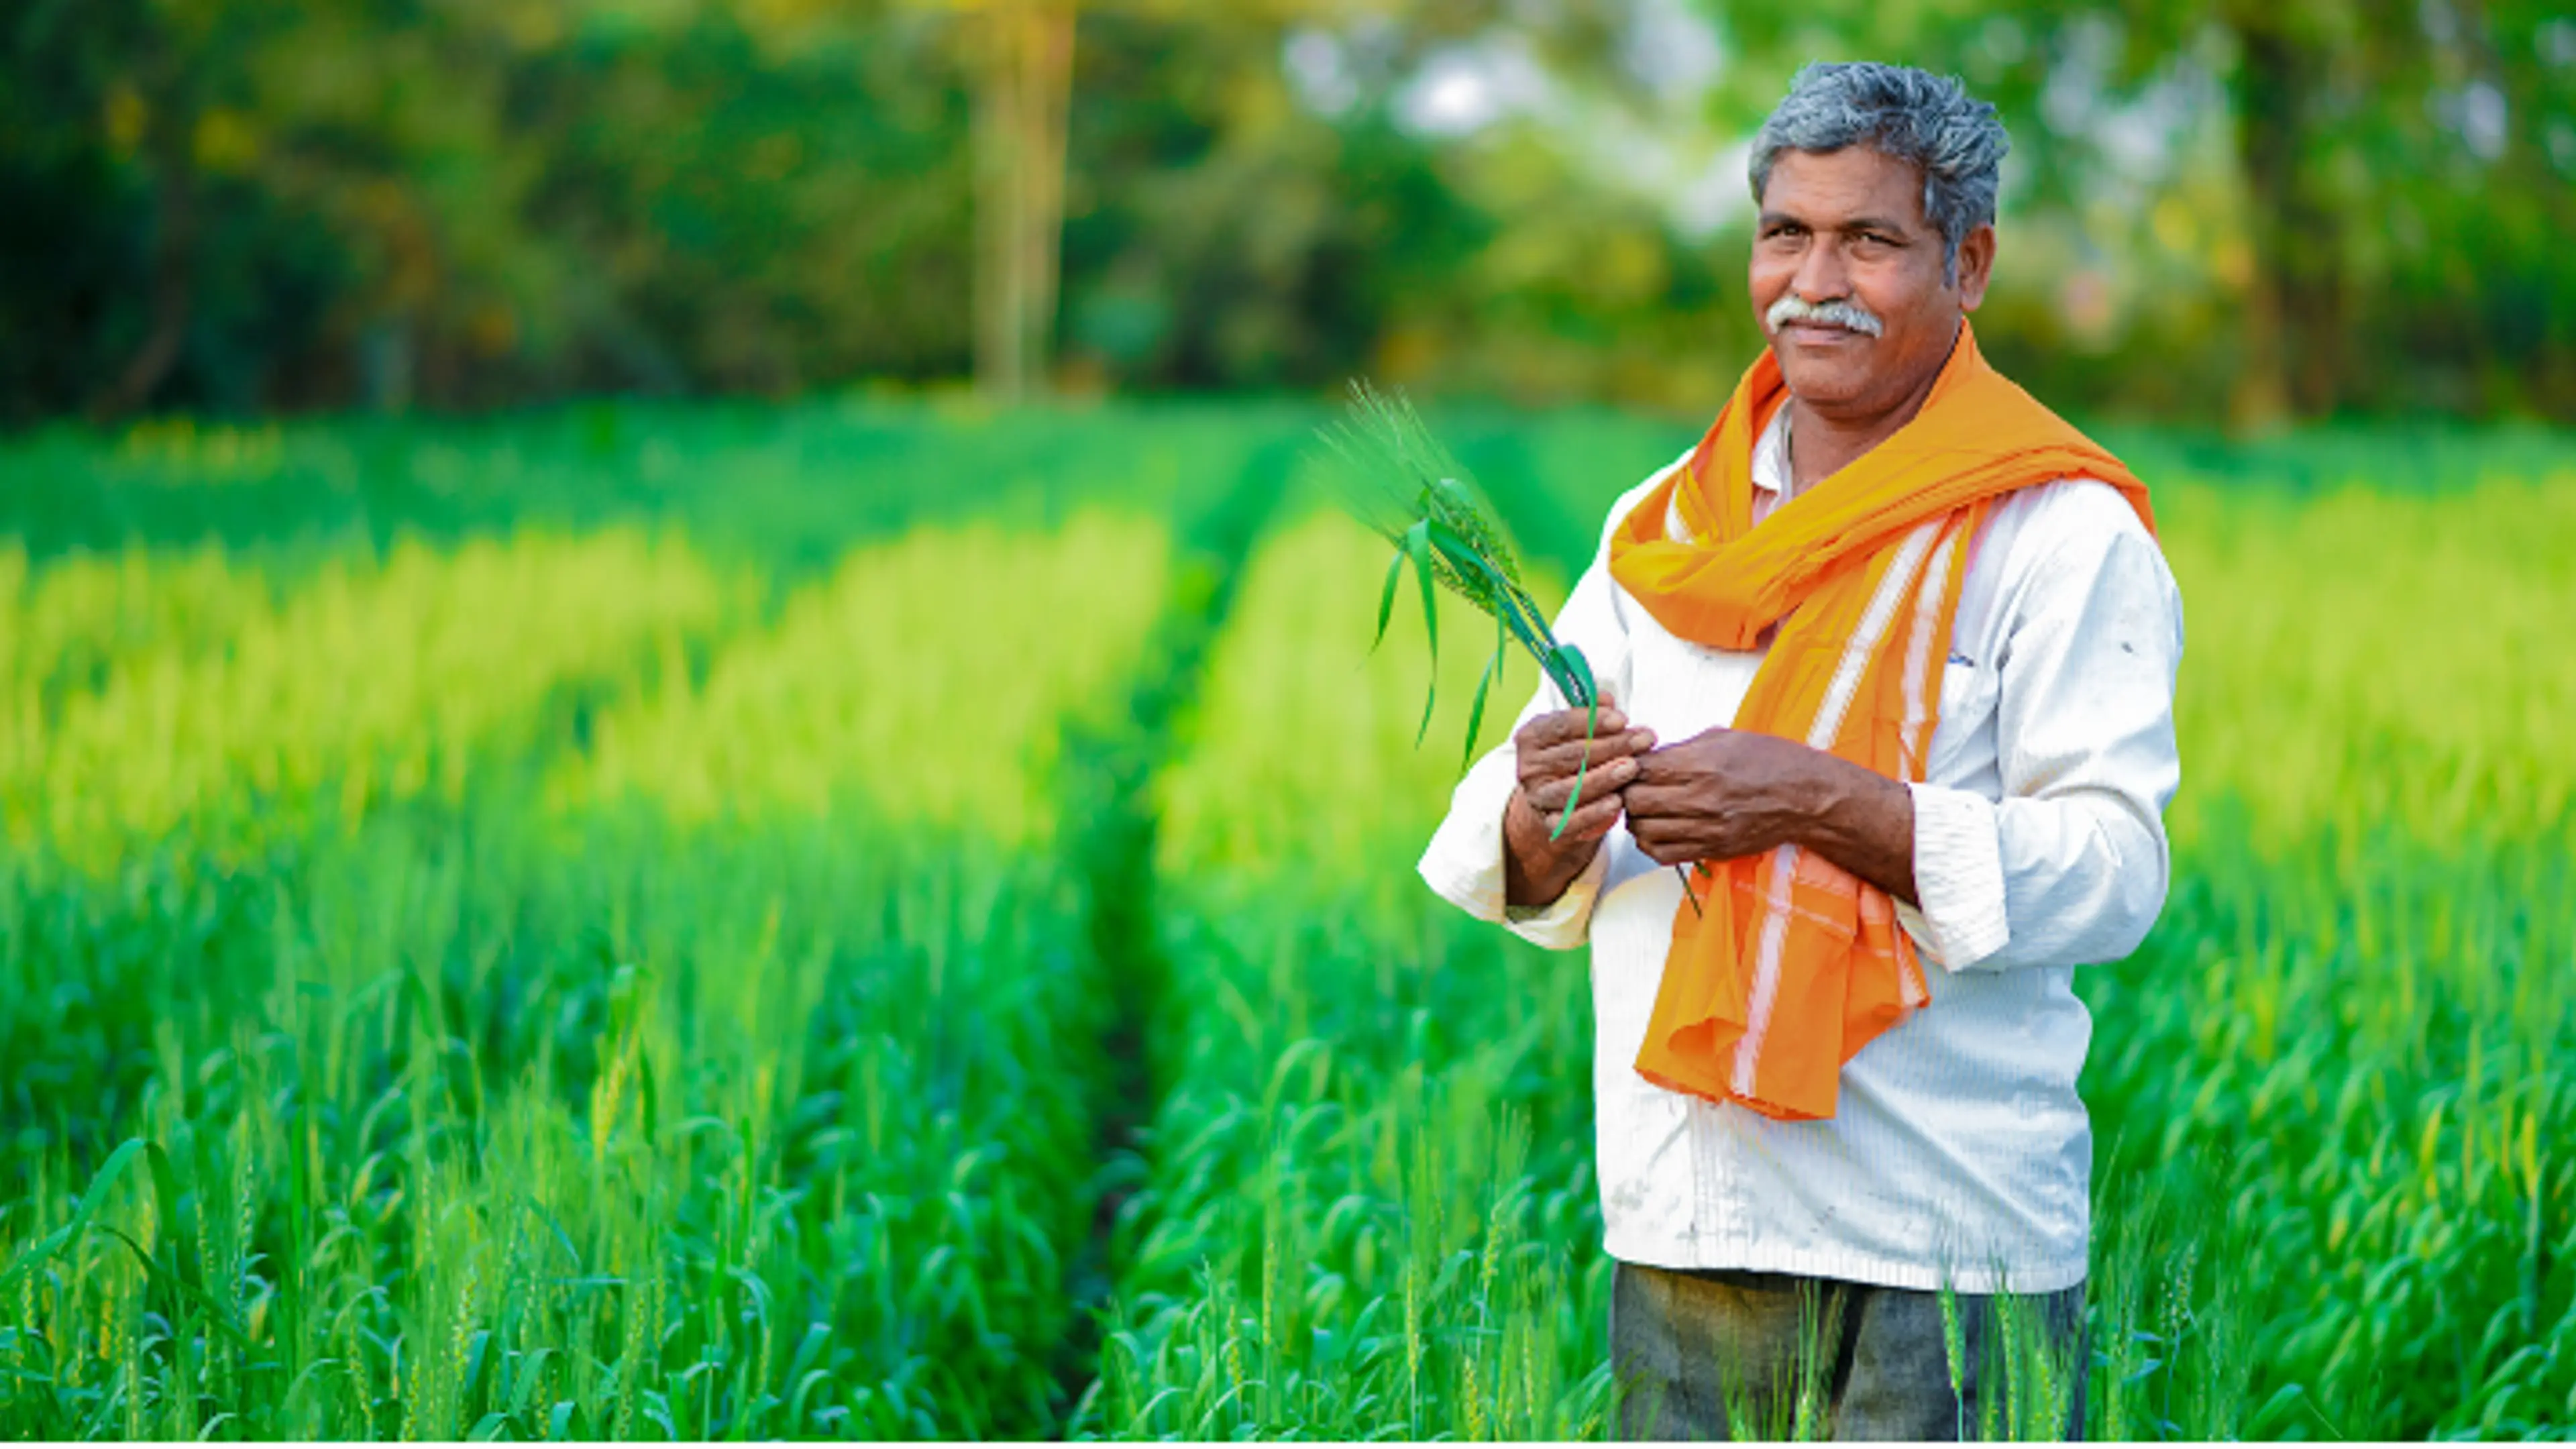 How the small Indian farmer can turn the wheels of sustainable agriculture

